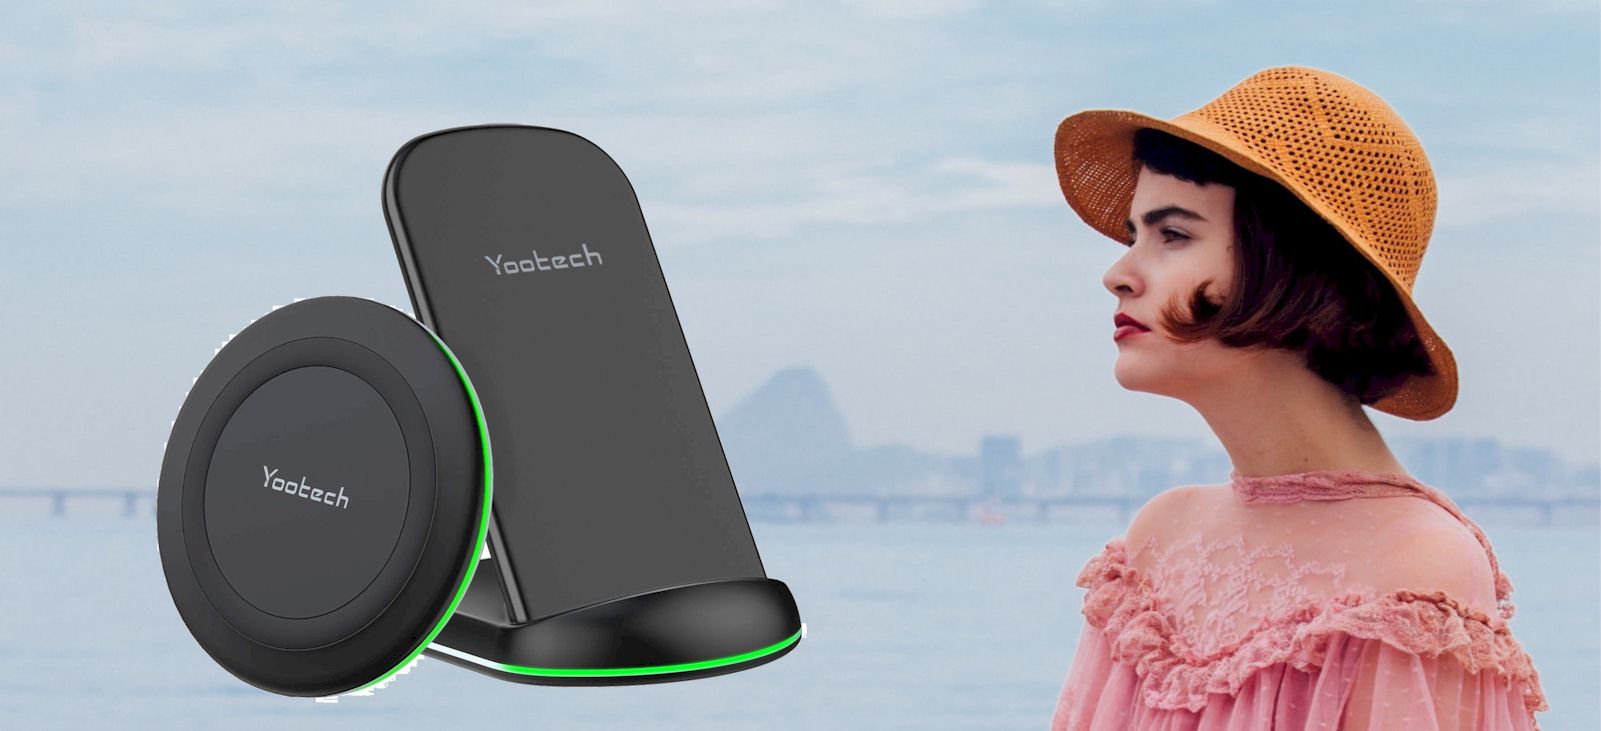 yootech wireless charger blinking green